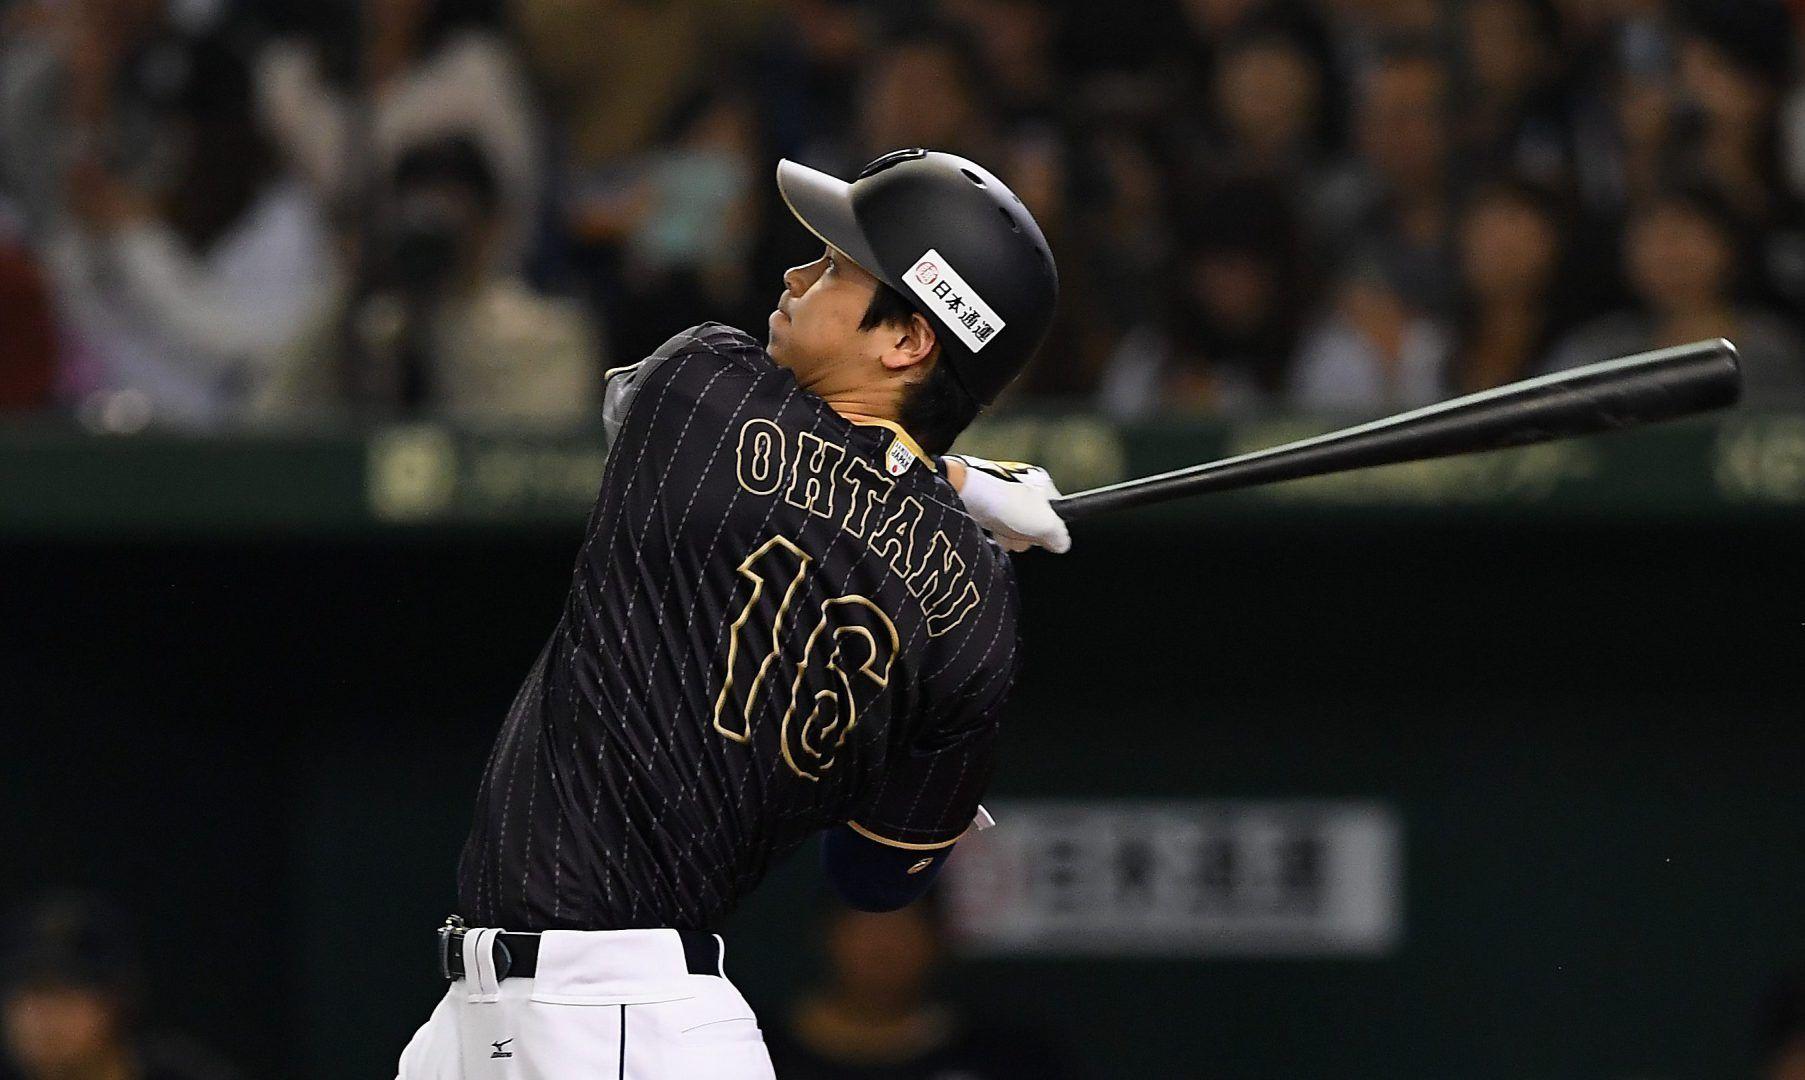 Report: Giants Are Finalists For Two Way Star Shohei Ohtani